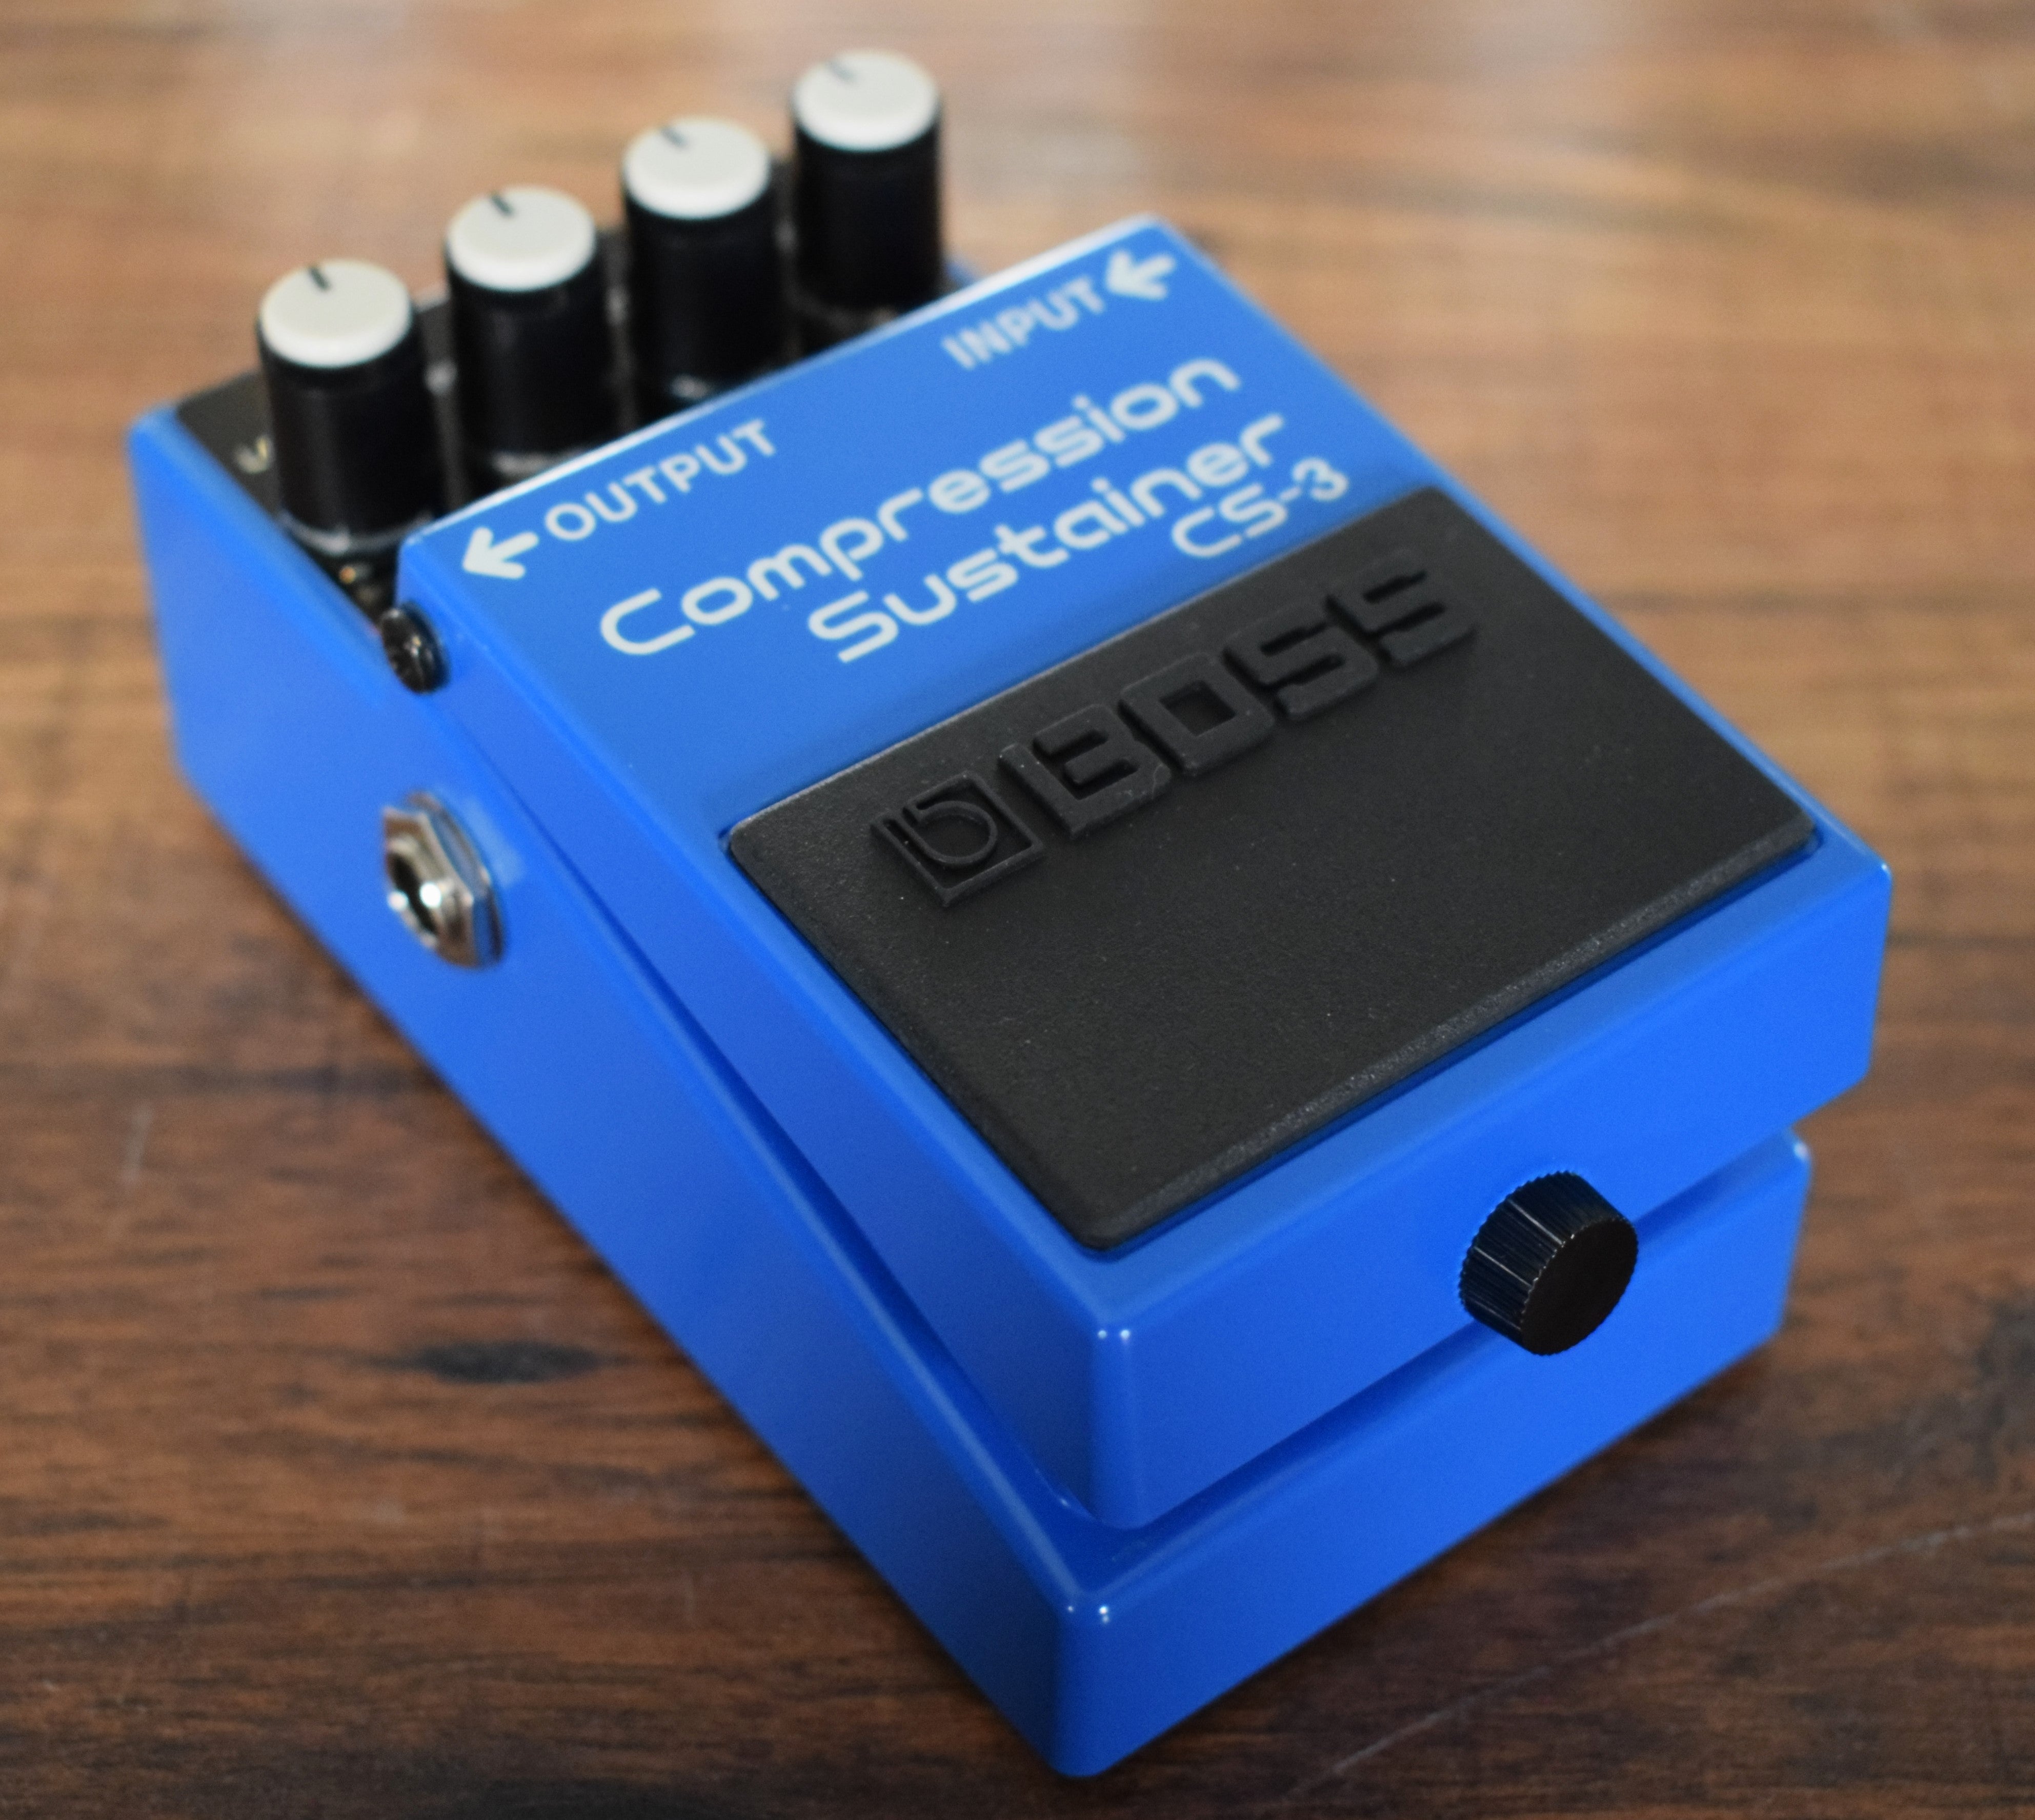 Boss CS-3 Compression Sustainer Pedal - 配信機器・PA機器 